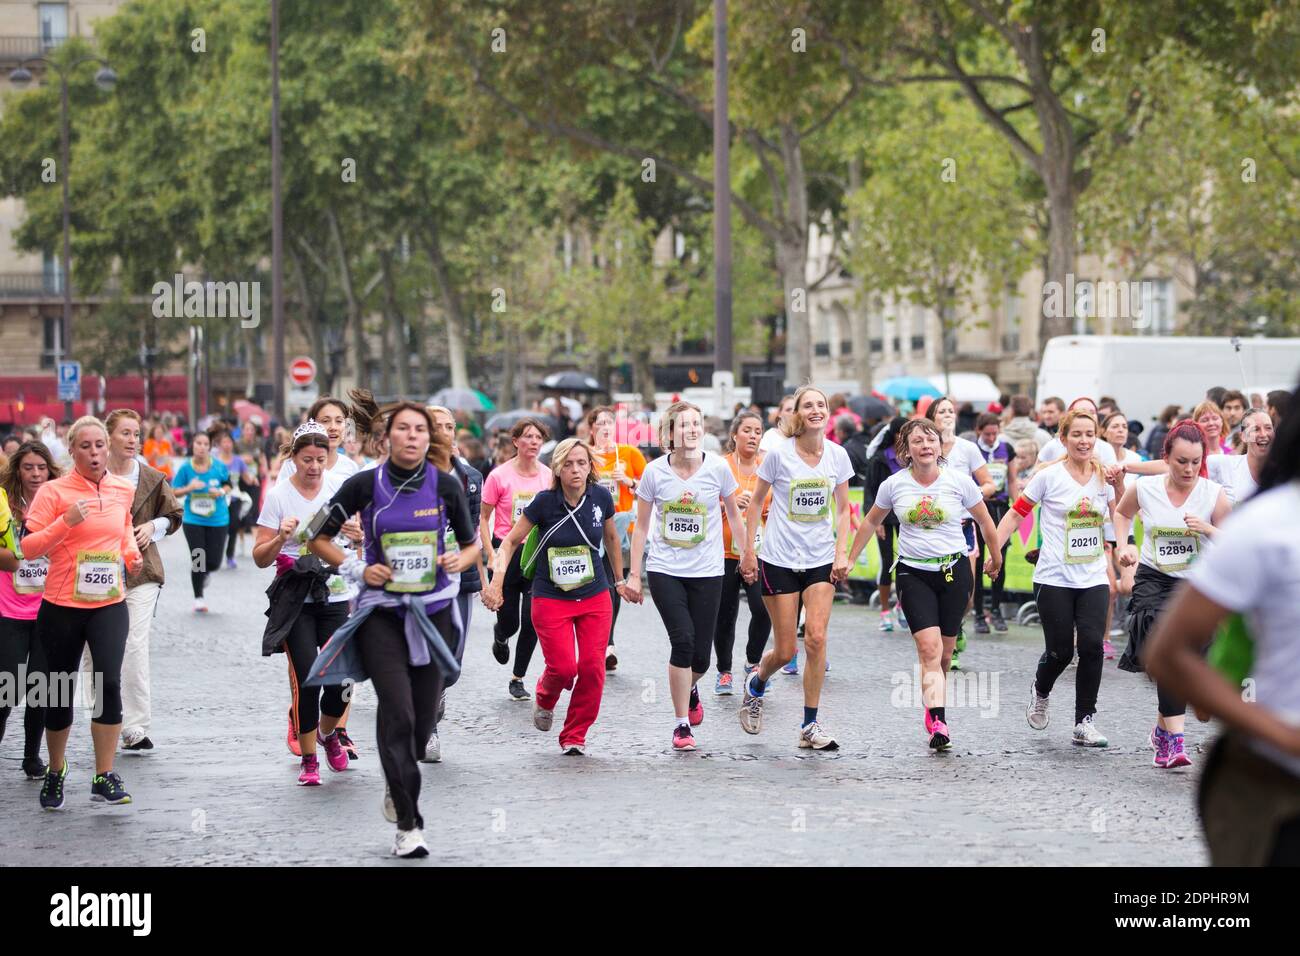 Nathalie Kosciusko Morizet (aka NKM) pictured running during La Parisienne  (a 7 kilometers run for women through Paris streets) on september 13, 2015,  in Paris, France. NKM has been running surrounded by